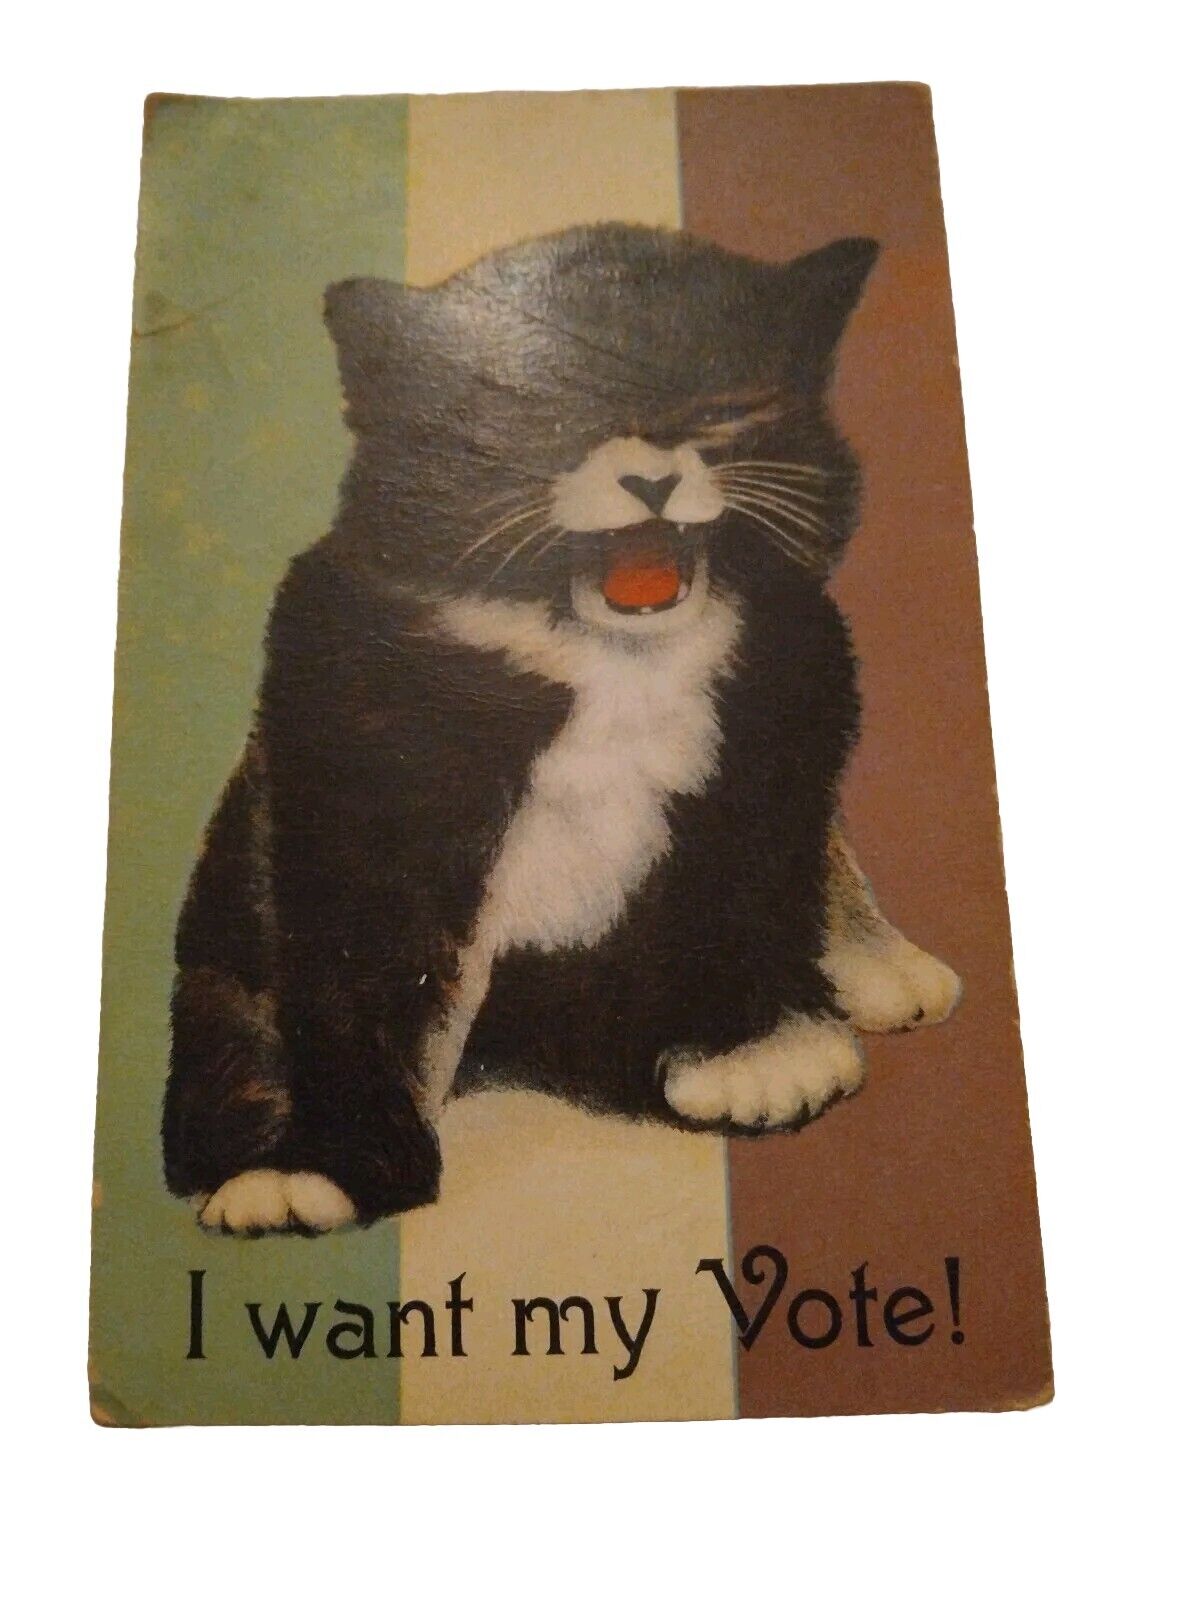 Kitty Cat Women's Suffrage Voting Rights I WANT MY VOTE c1910 Postcard